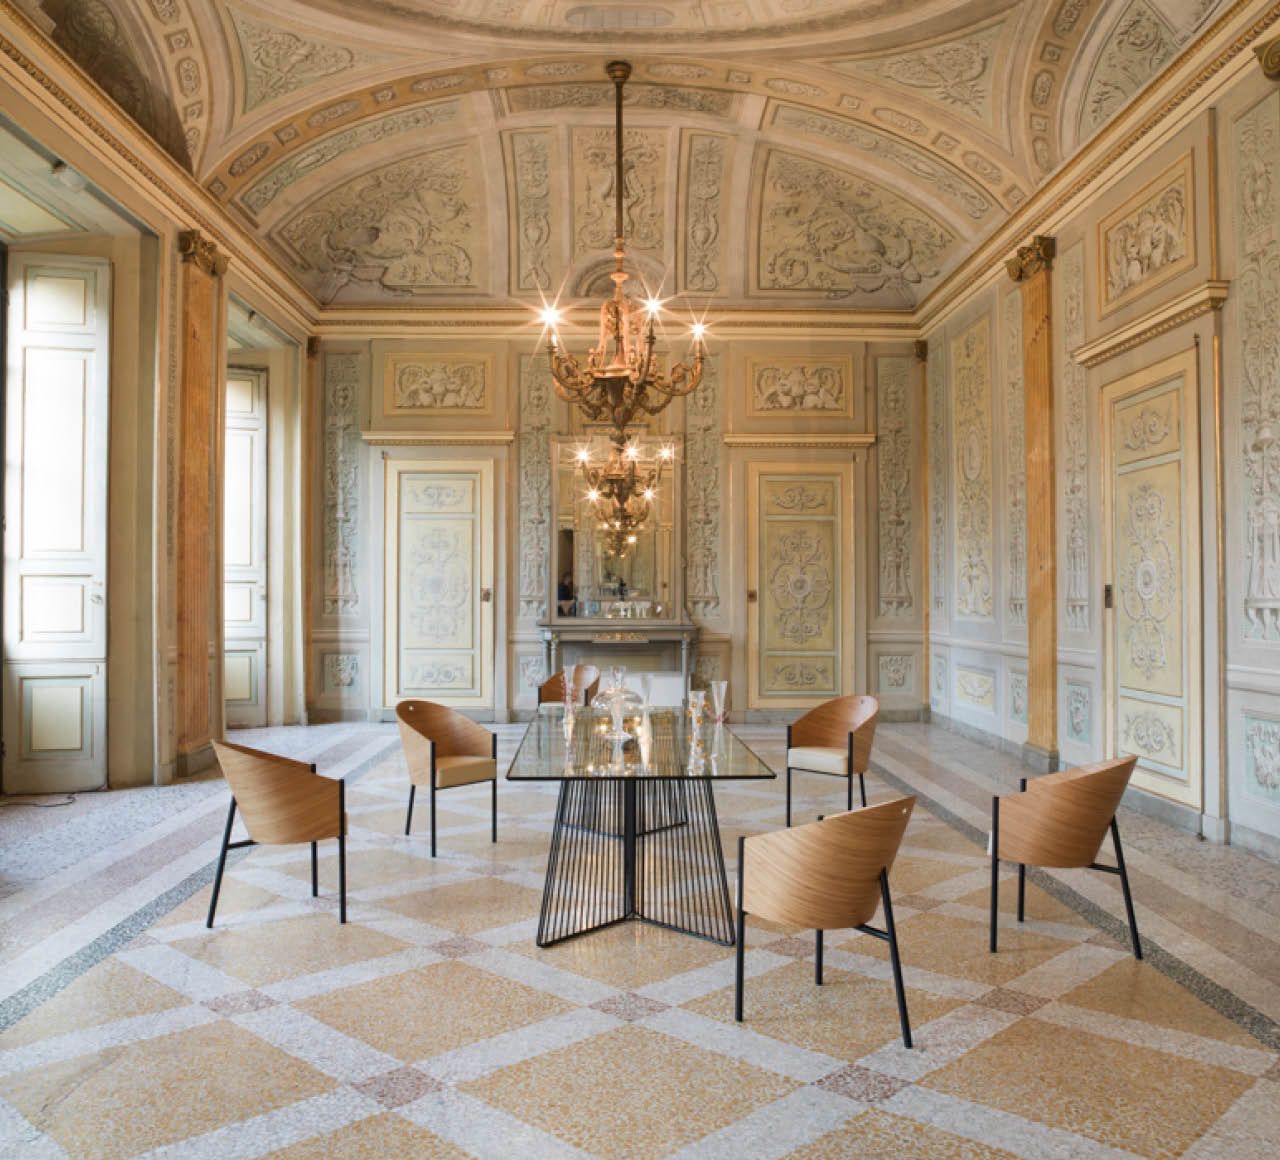 Philippe Starck's Costes Chair for Driade.